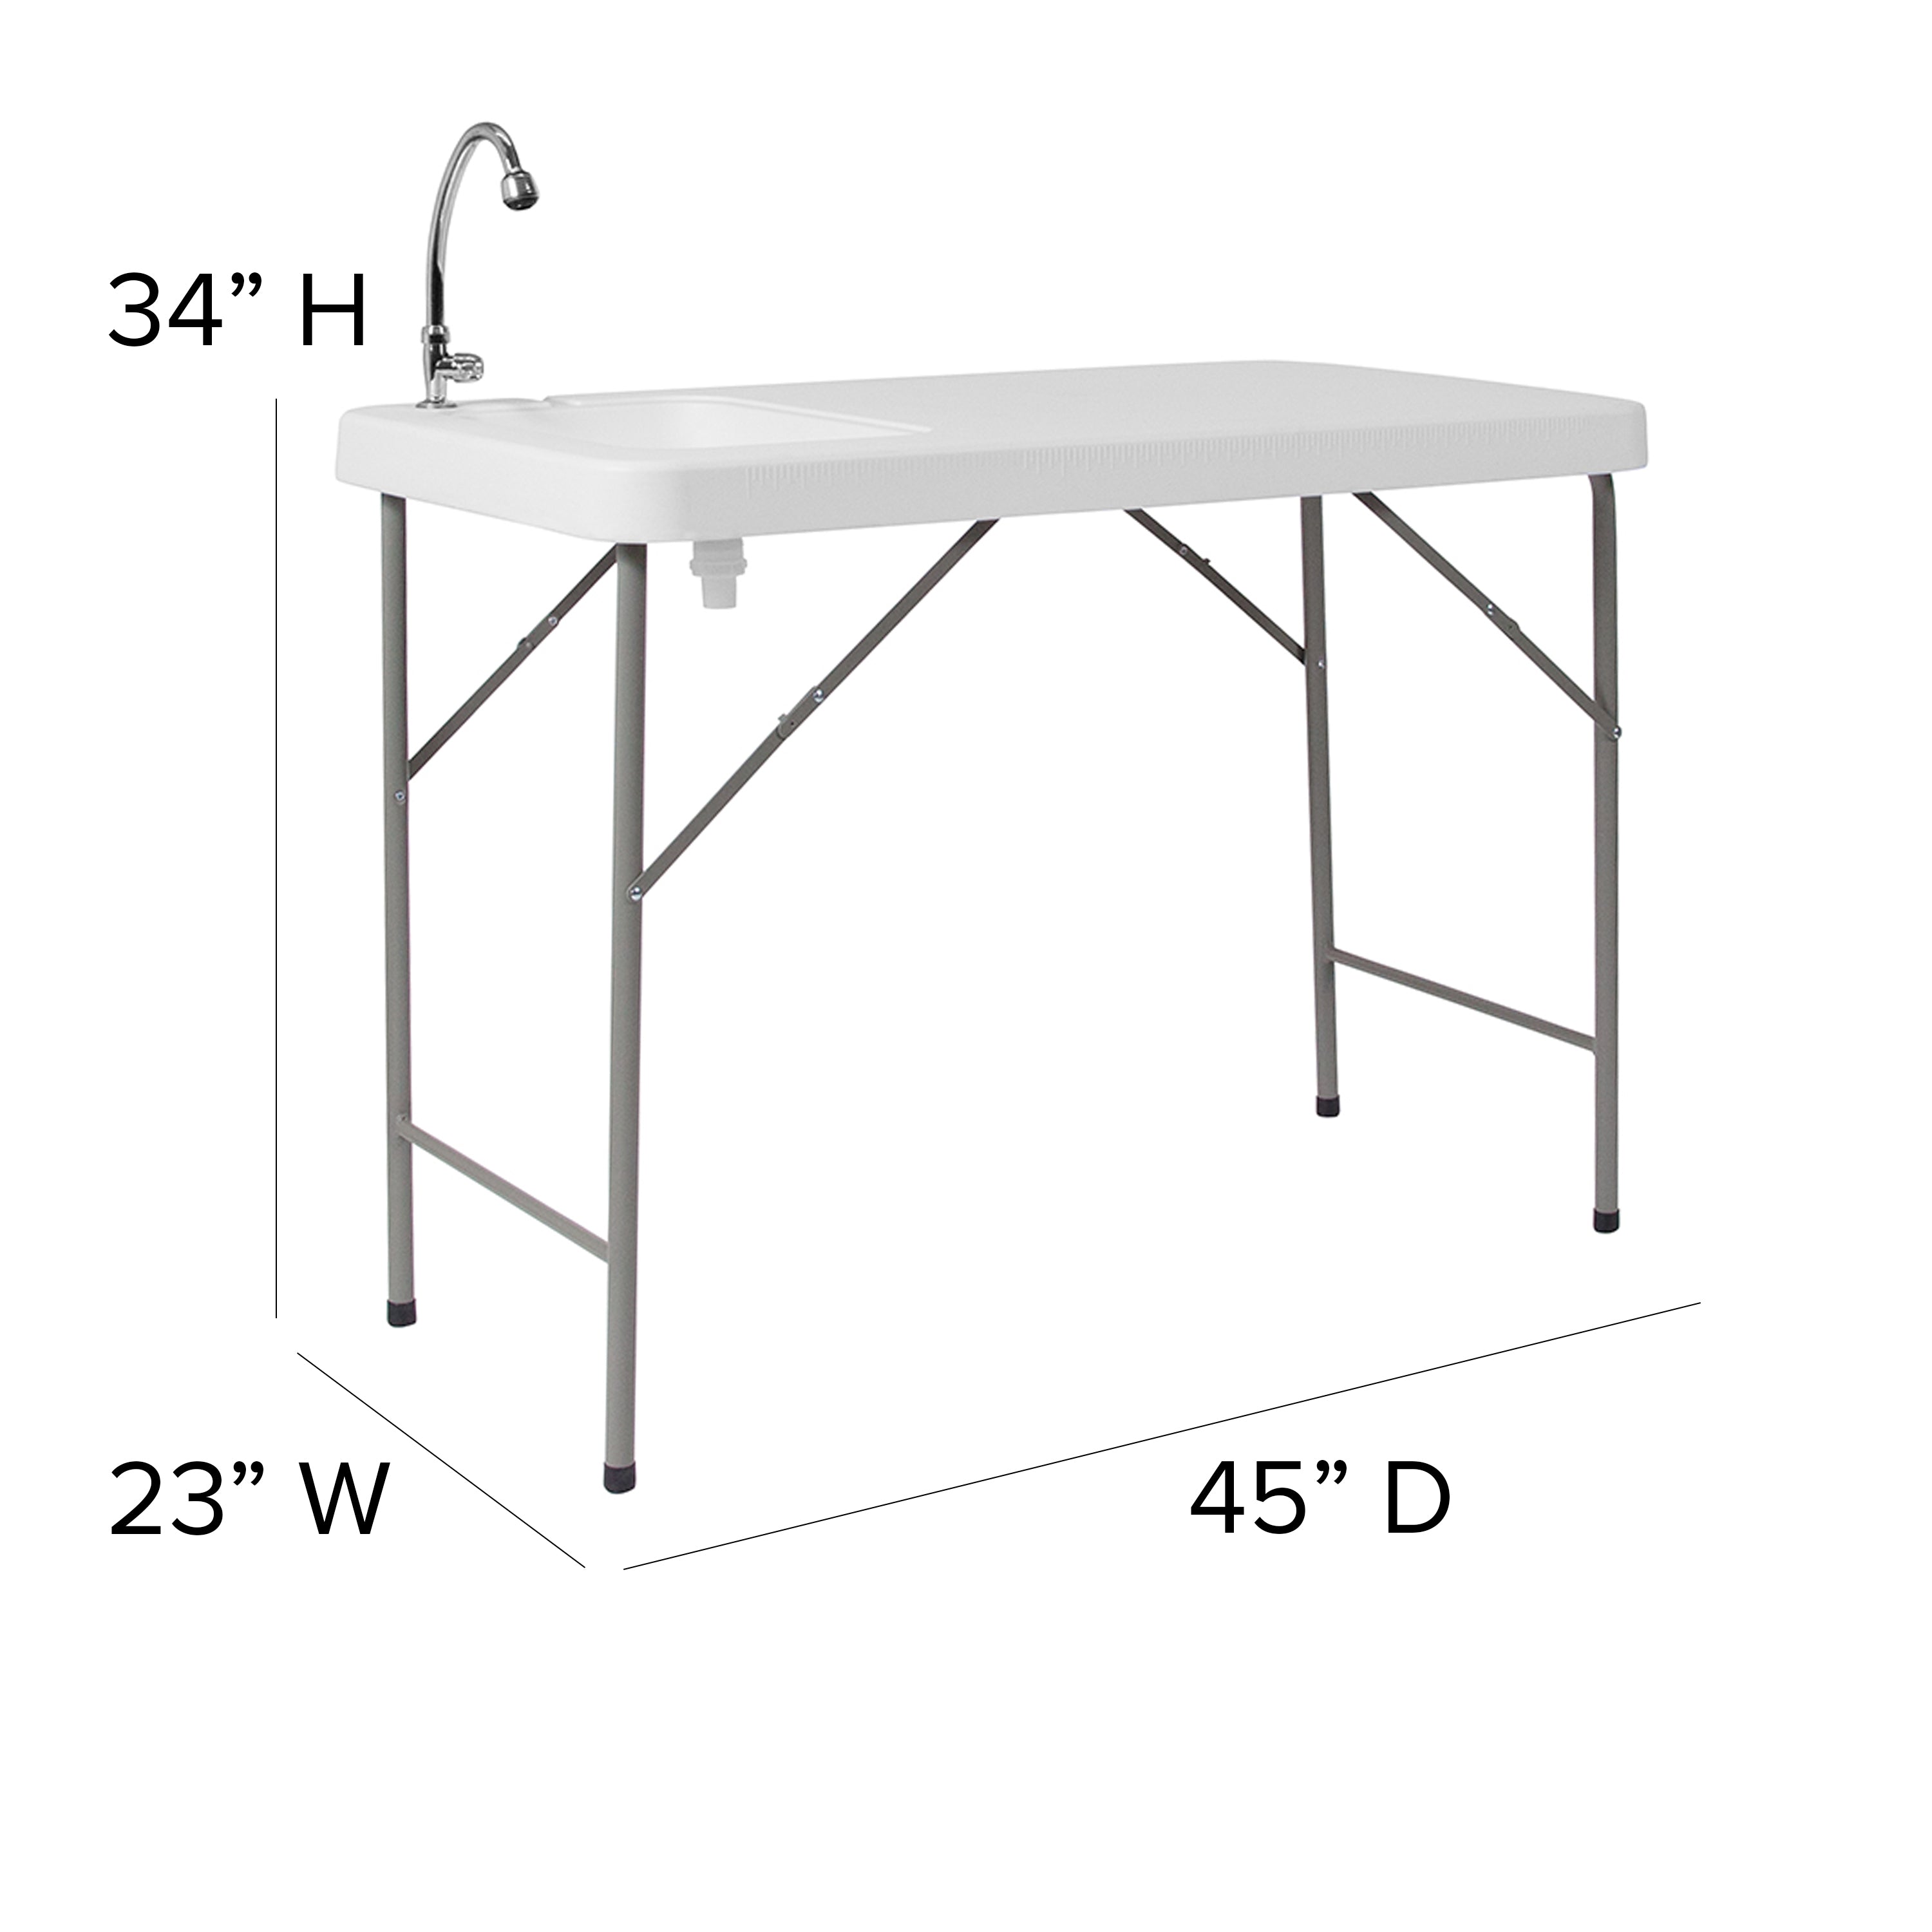 4-Foot Portable Fish Cleaning Table / Outdoor Camping Table and Sink-Rectangular Plastic Folding Table-Flash Furniture-Wall2Wall Furnishings